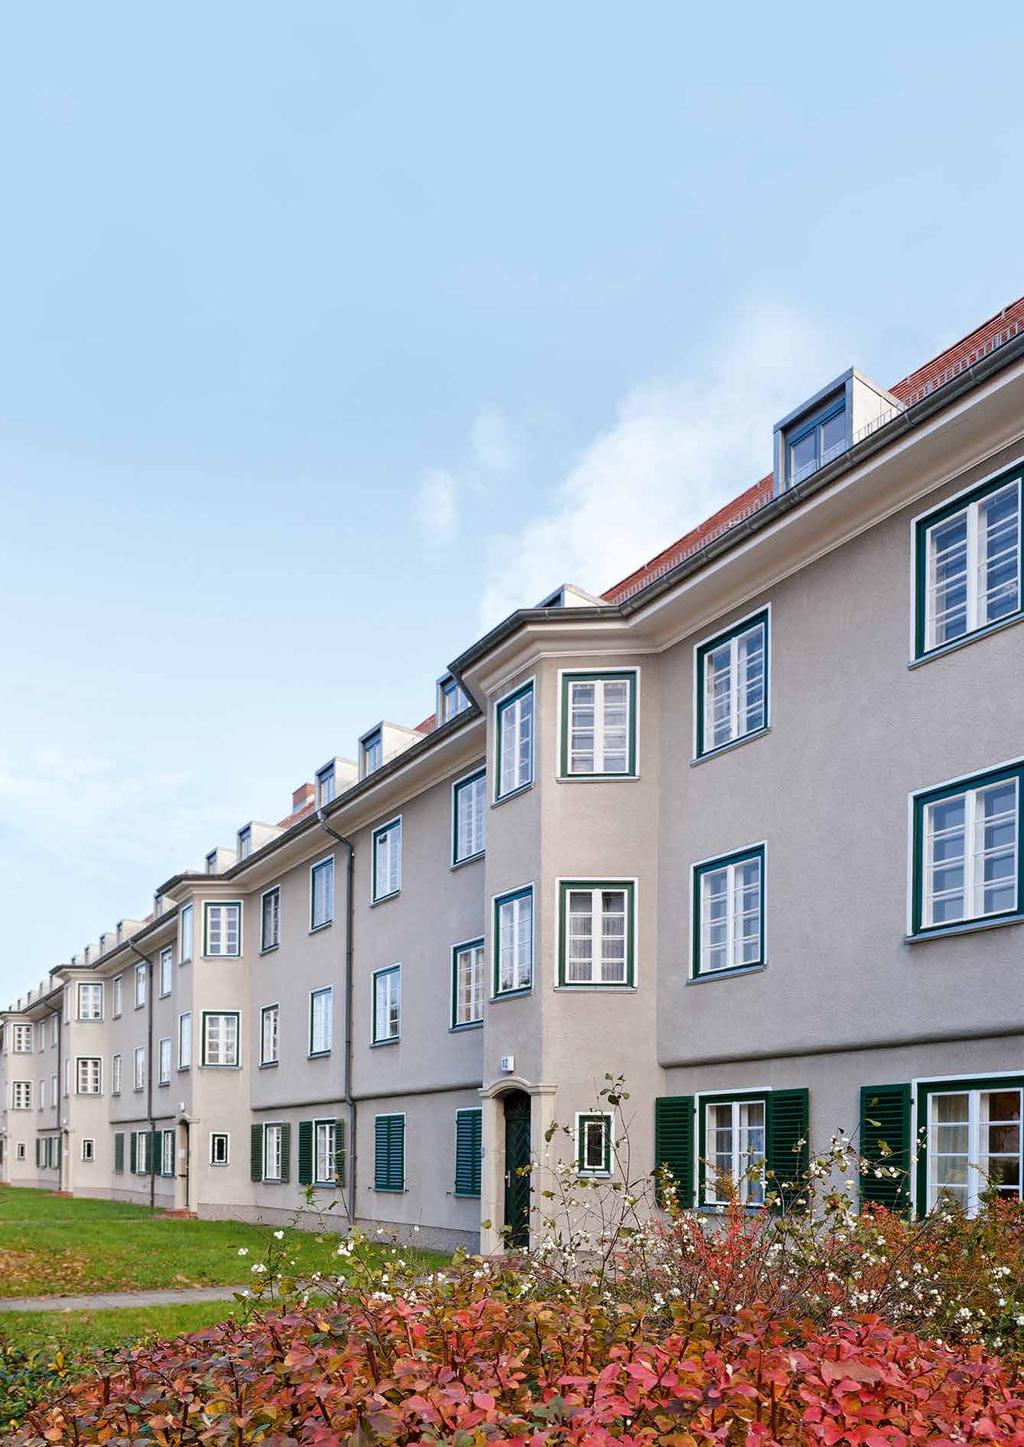 22 Berlin-Schmargendorf, part of our portfolio since 2013 23 72 % of our portfolio is located in the boom market of Berlin.